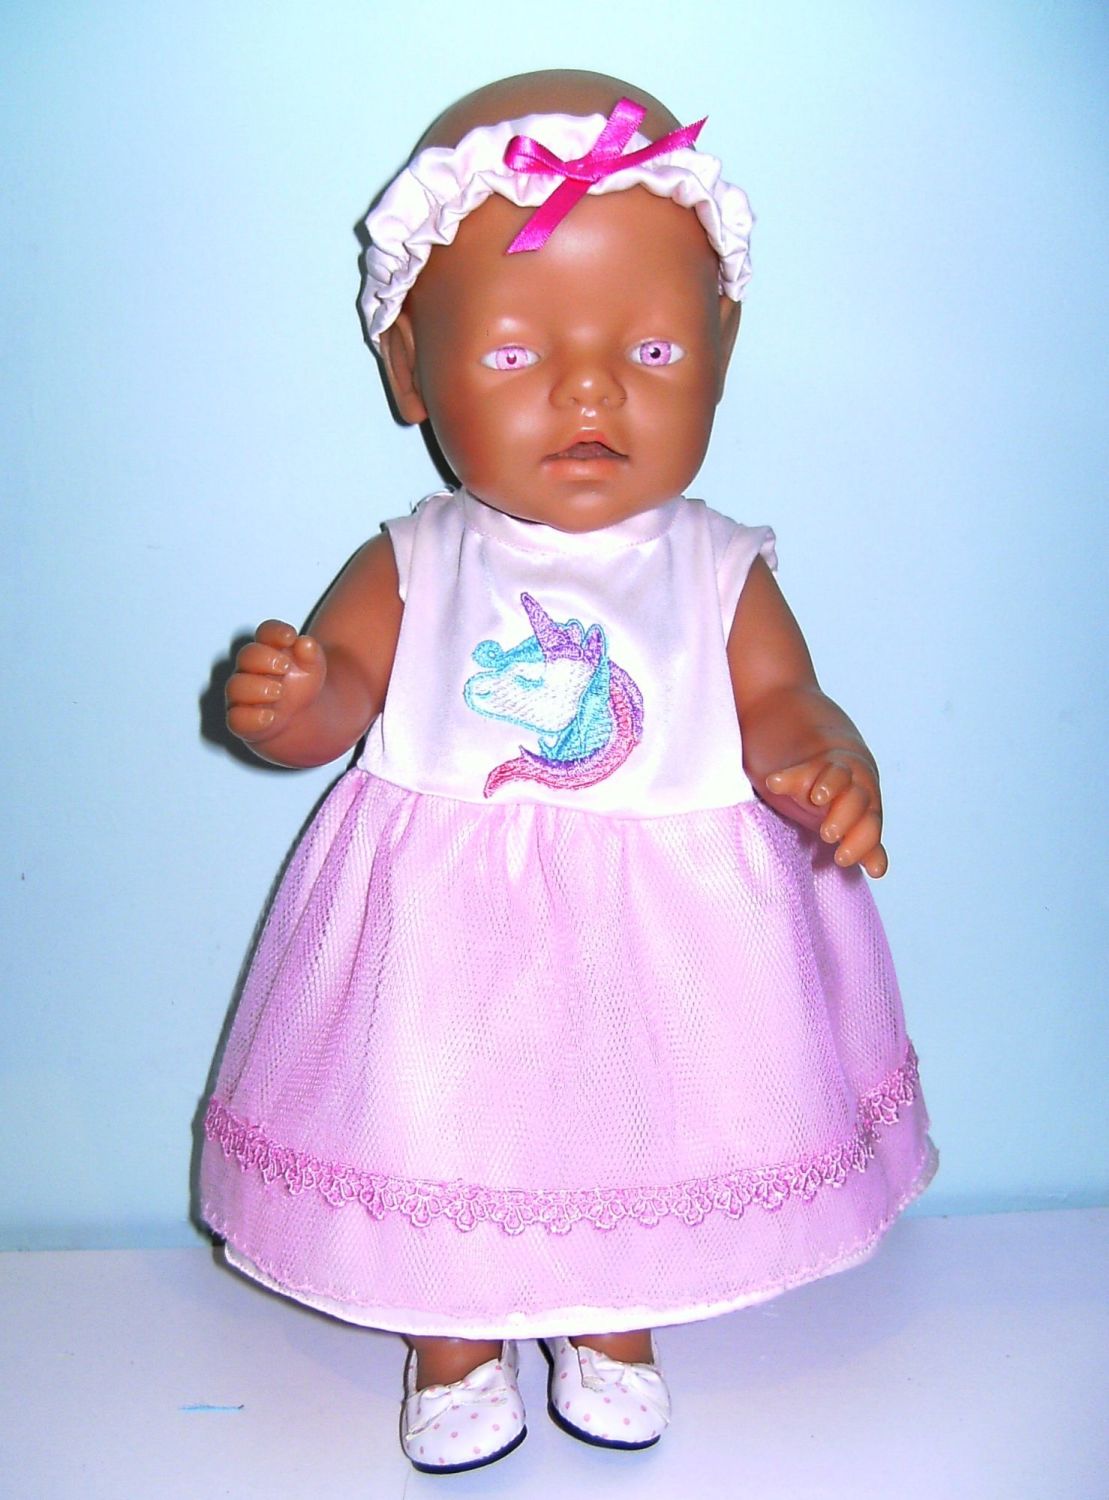 Doll's party dress to fit 16 inch high baby dolls